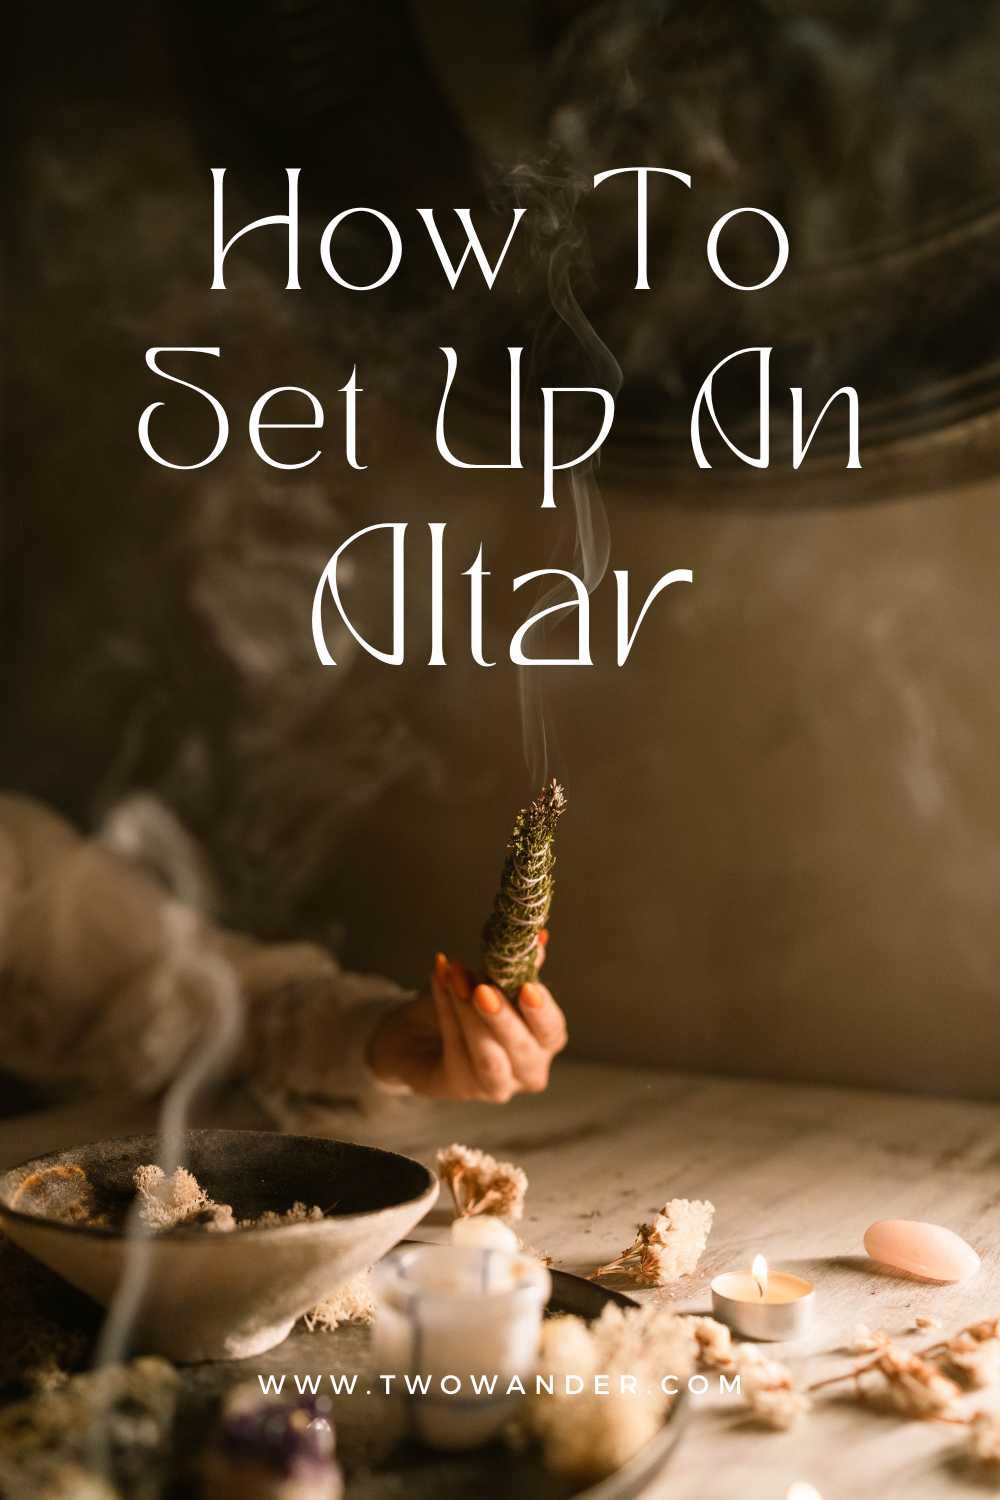 two-wander- how-to-set-up-a-spiritual-altar